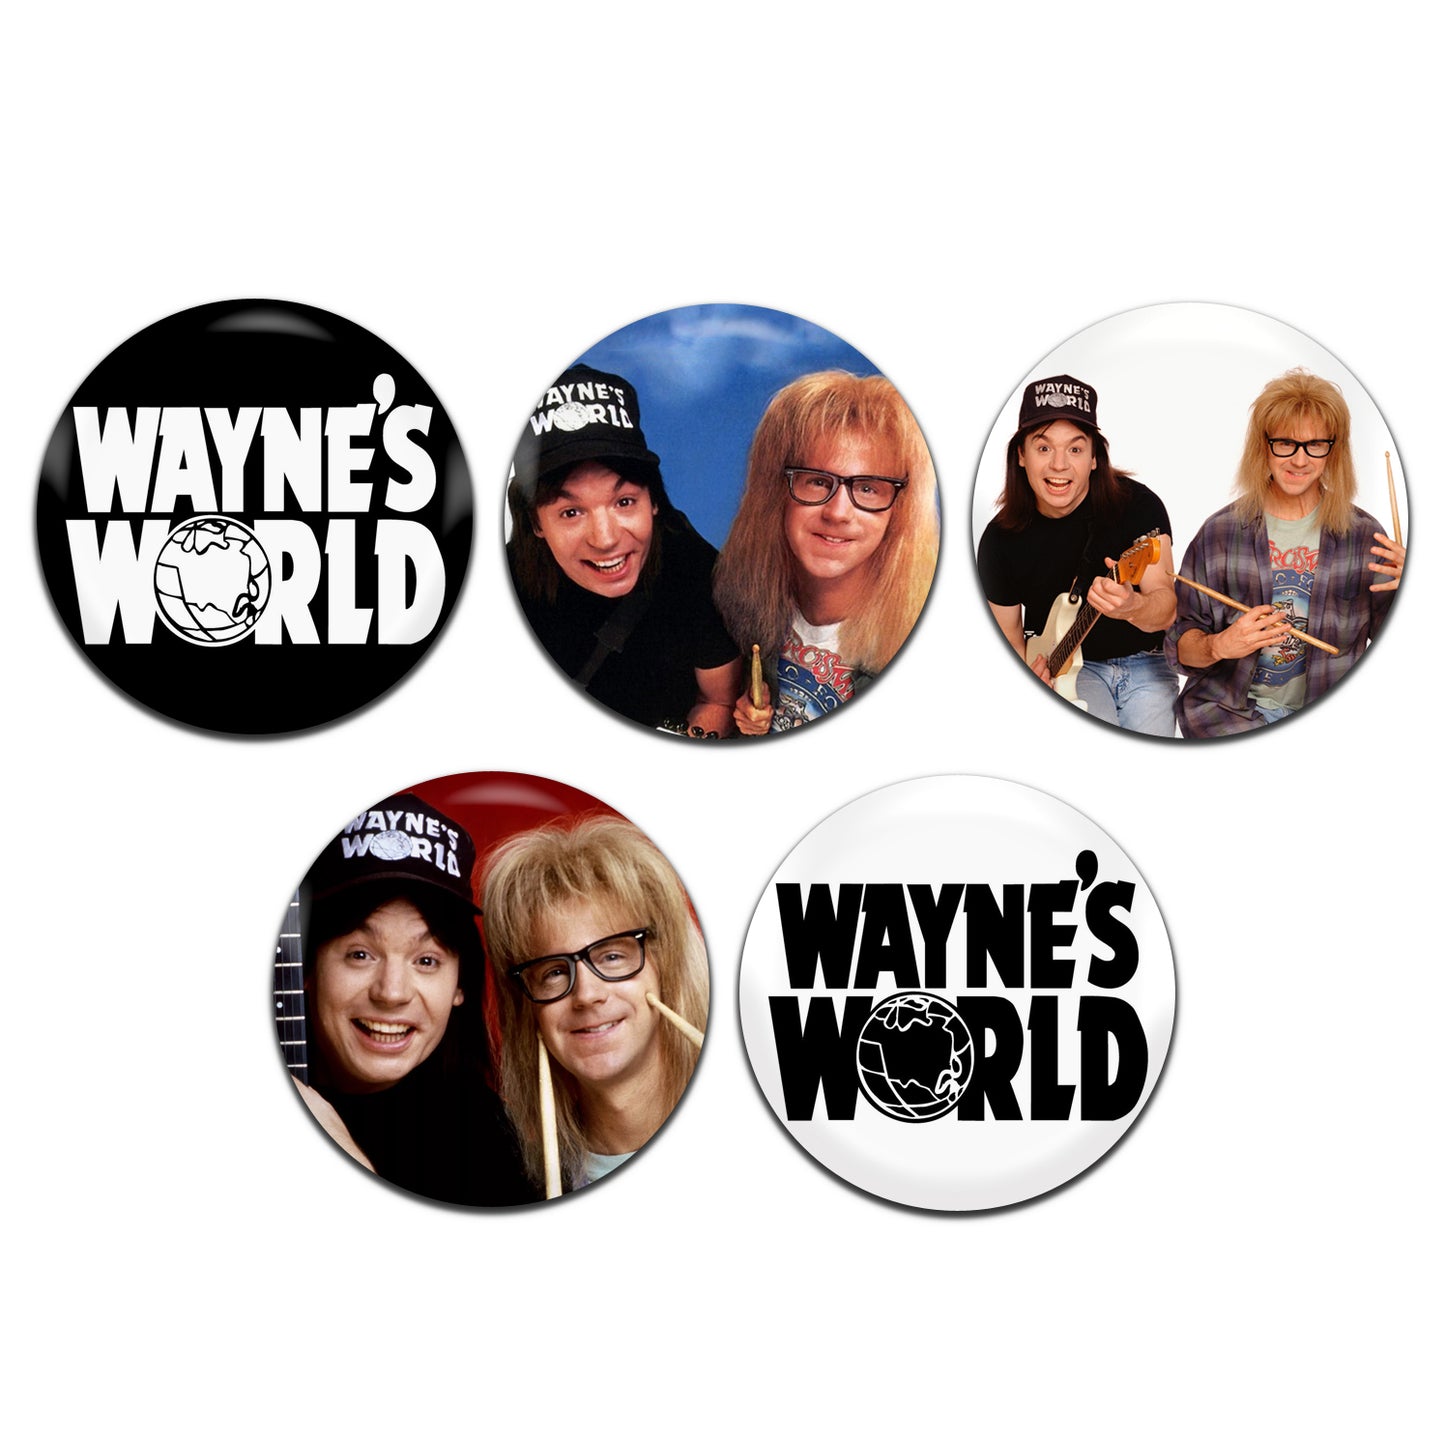 Wayne's World Movie Comedy Film 90's 25mm / 1 Inch D-Pin Button Badges (5x Set)